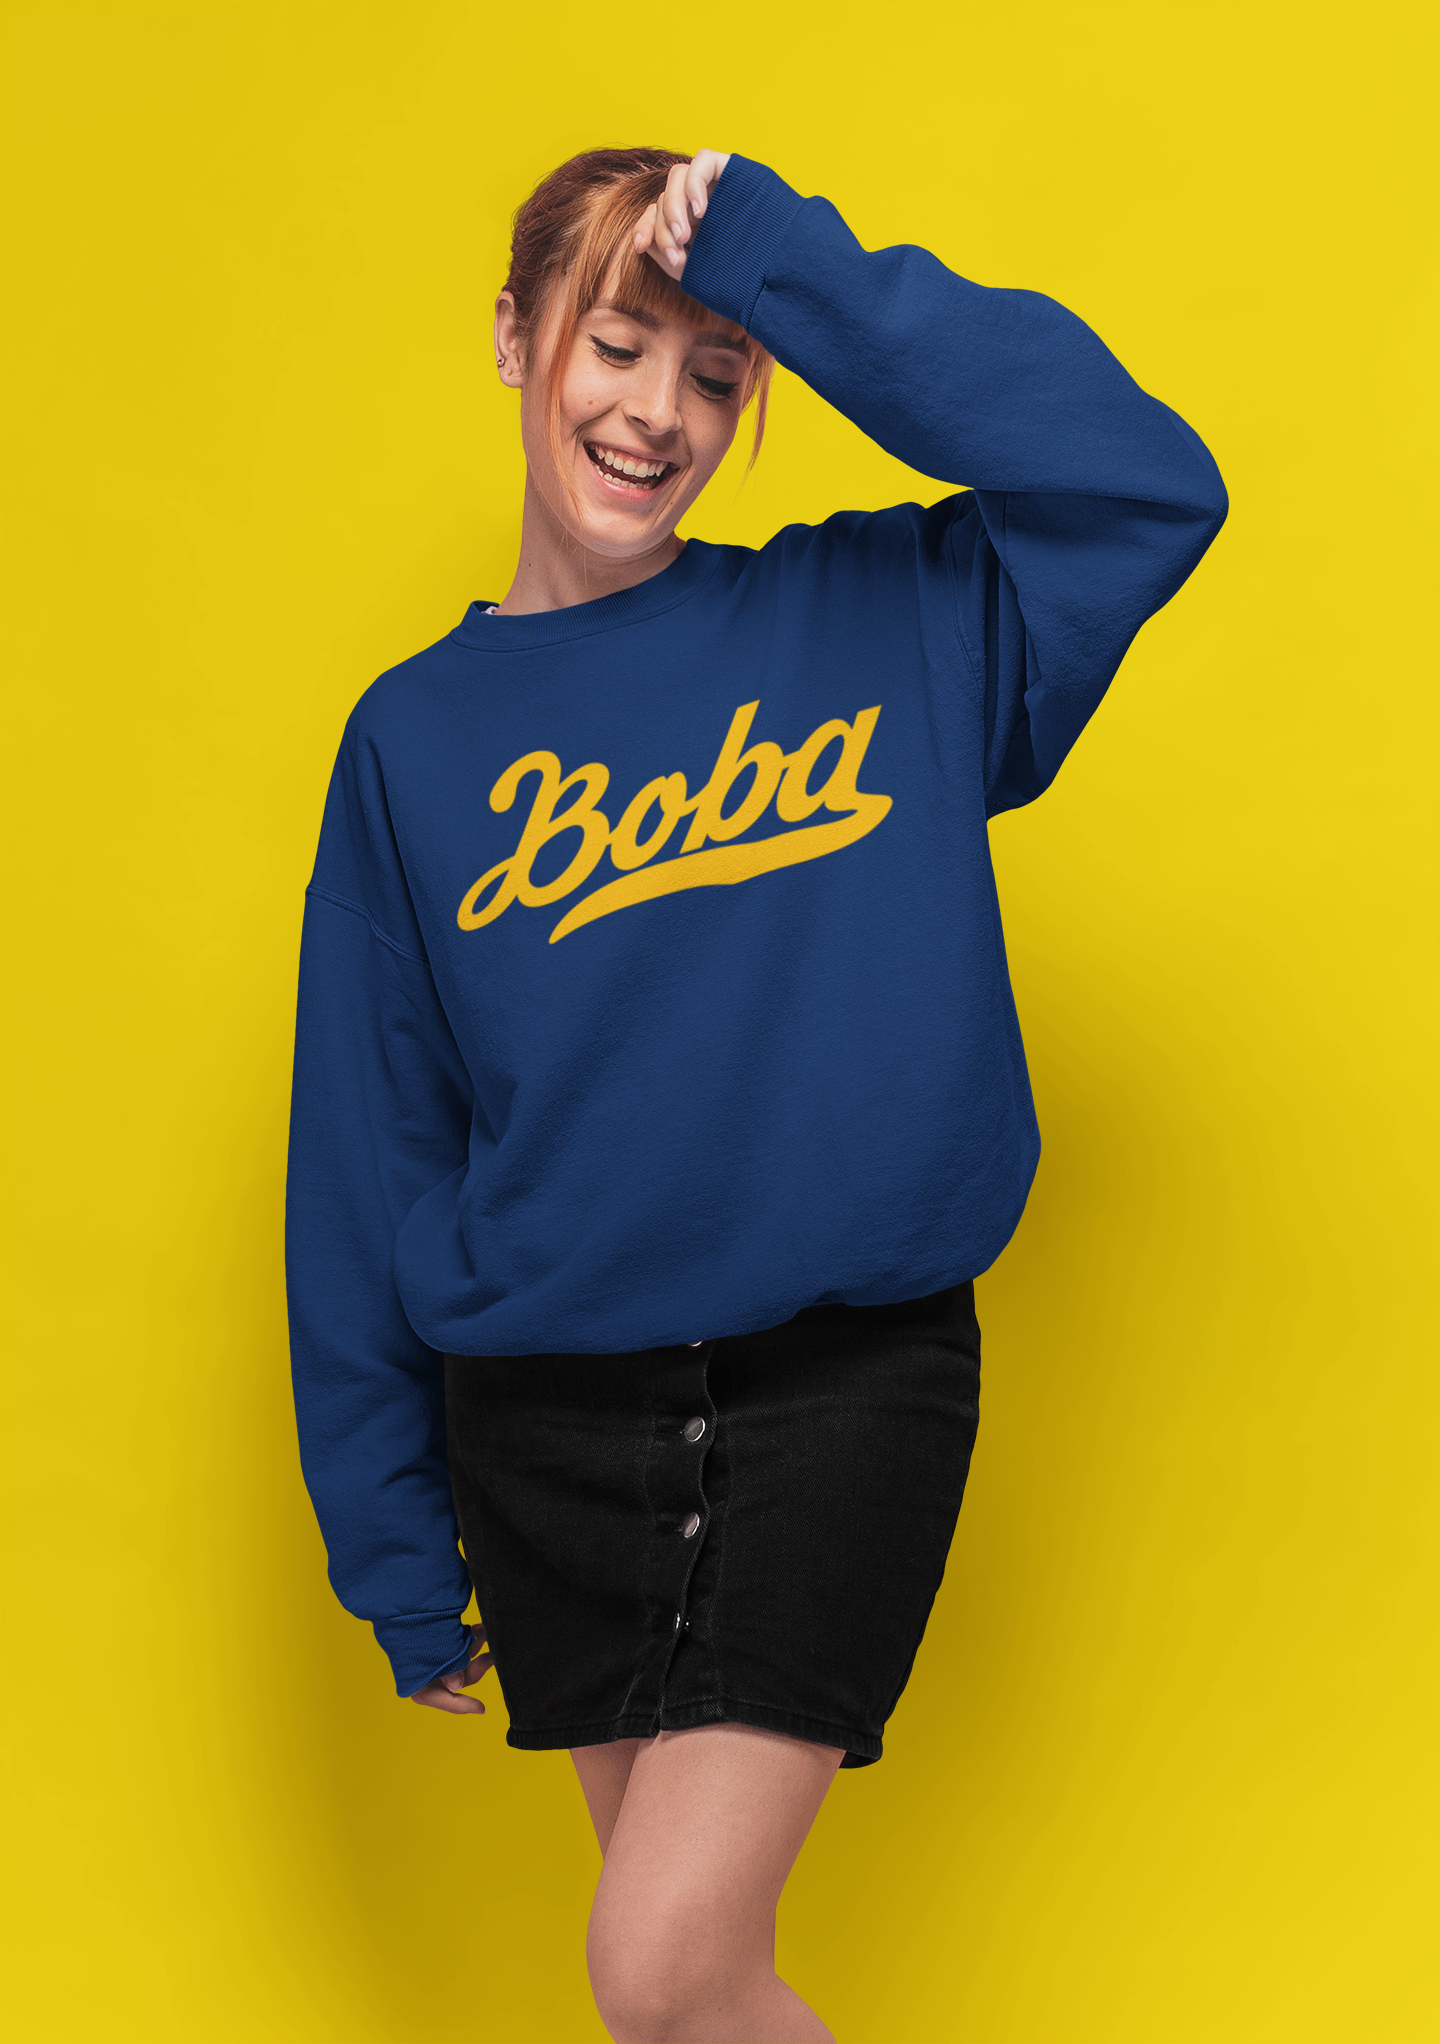 Woman wearing a UC Boba shirt smiling against a yellow background